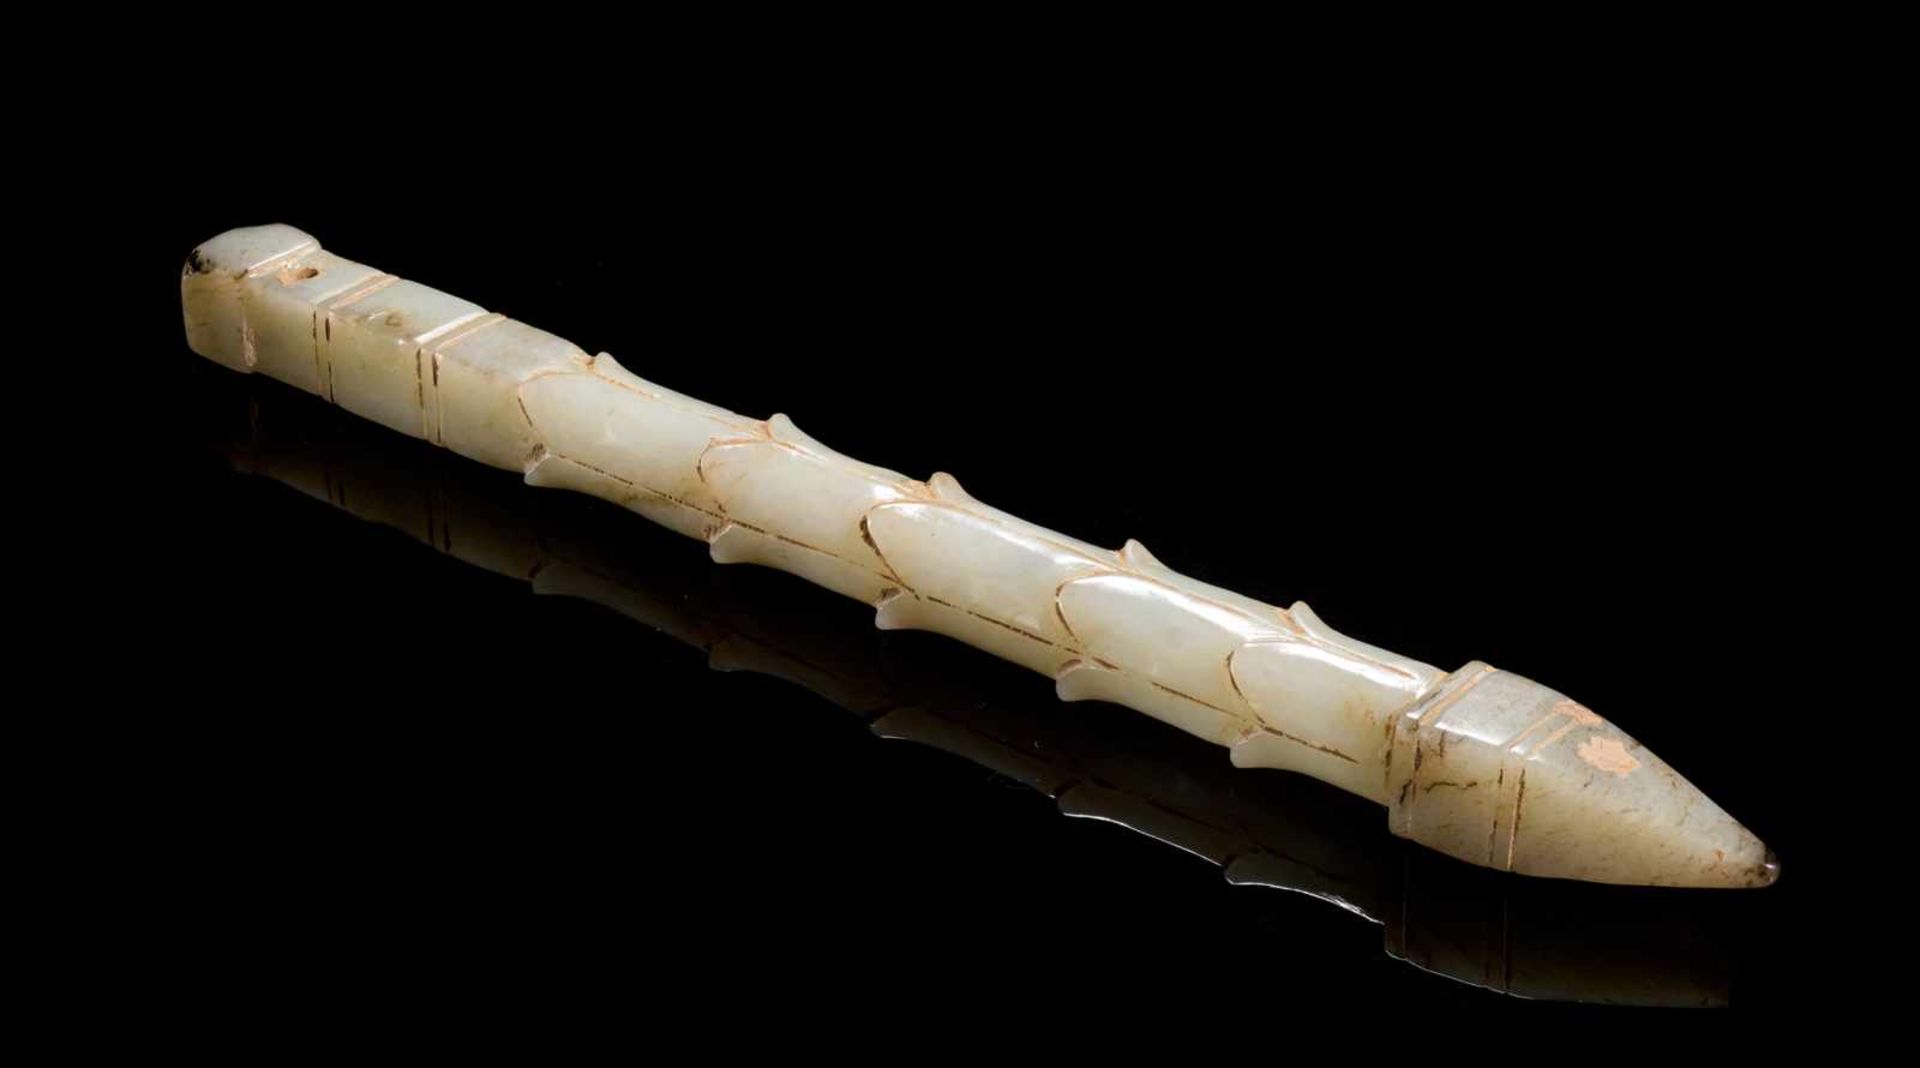 A SOPHISTICATED HANDLE-SHAPED OBJECT IN WHITE JADE DECORATED WITH LEAF PATTERNS Jade. China, Late